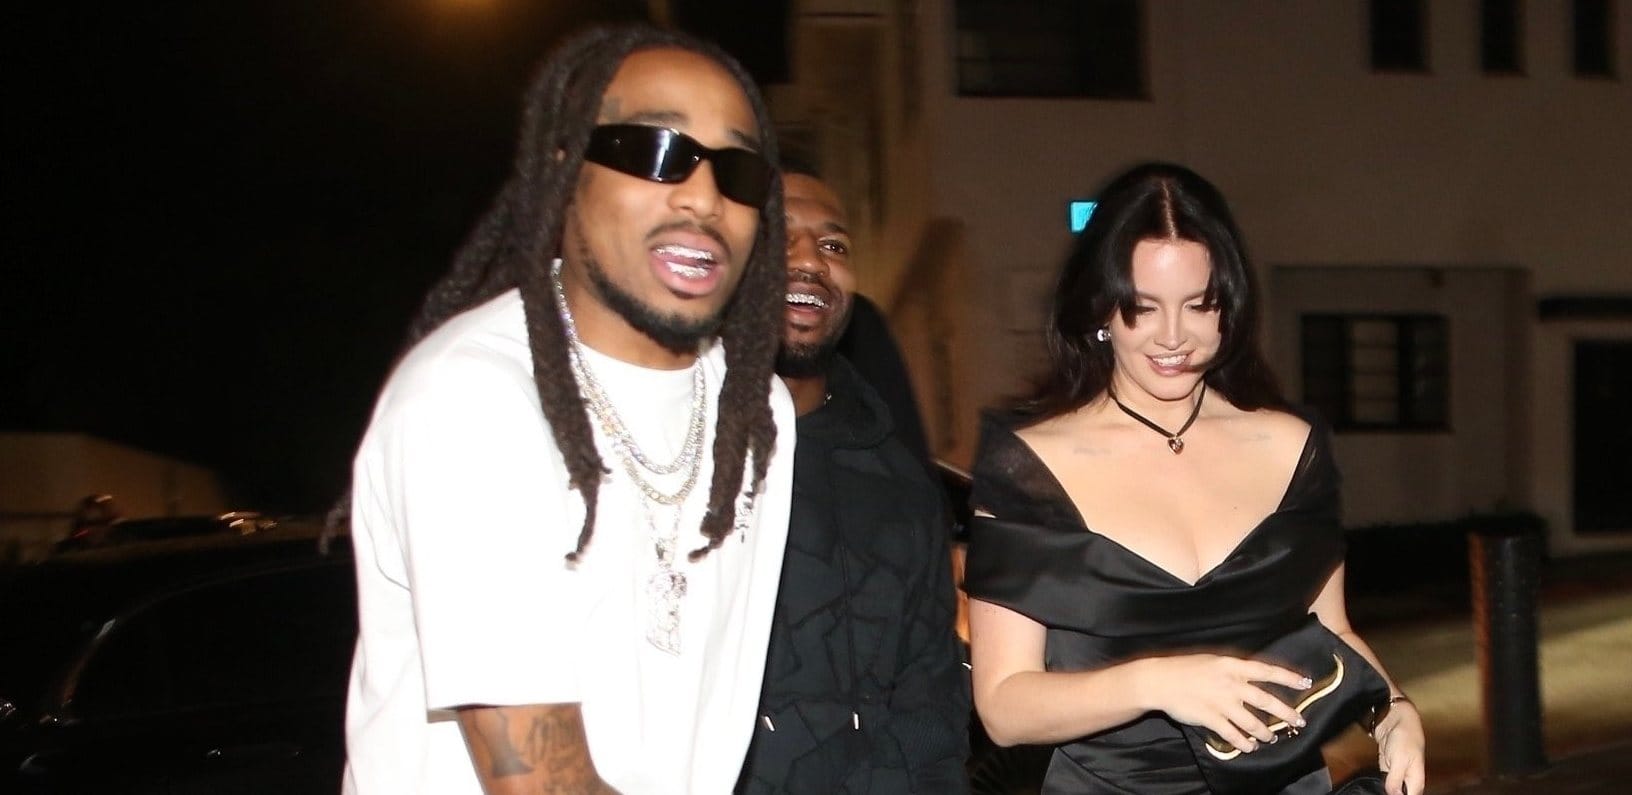 Lana Del Rey and Quavo Ignite Dating Rumors After Grammy Awards Appearance